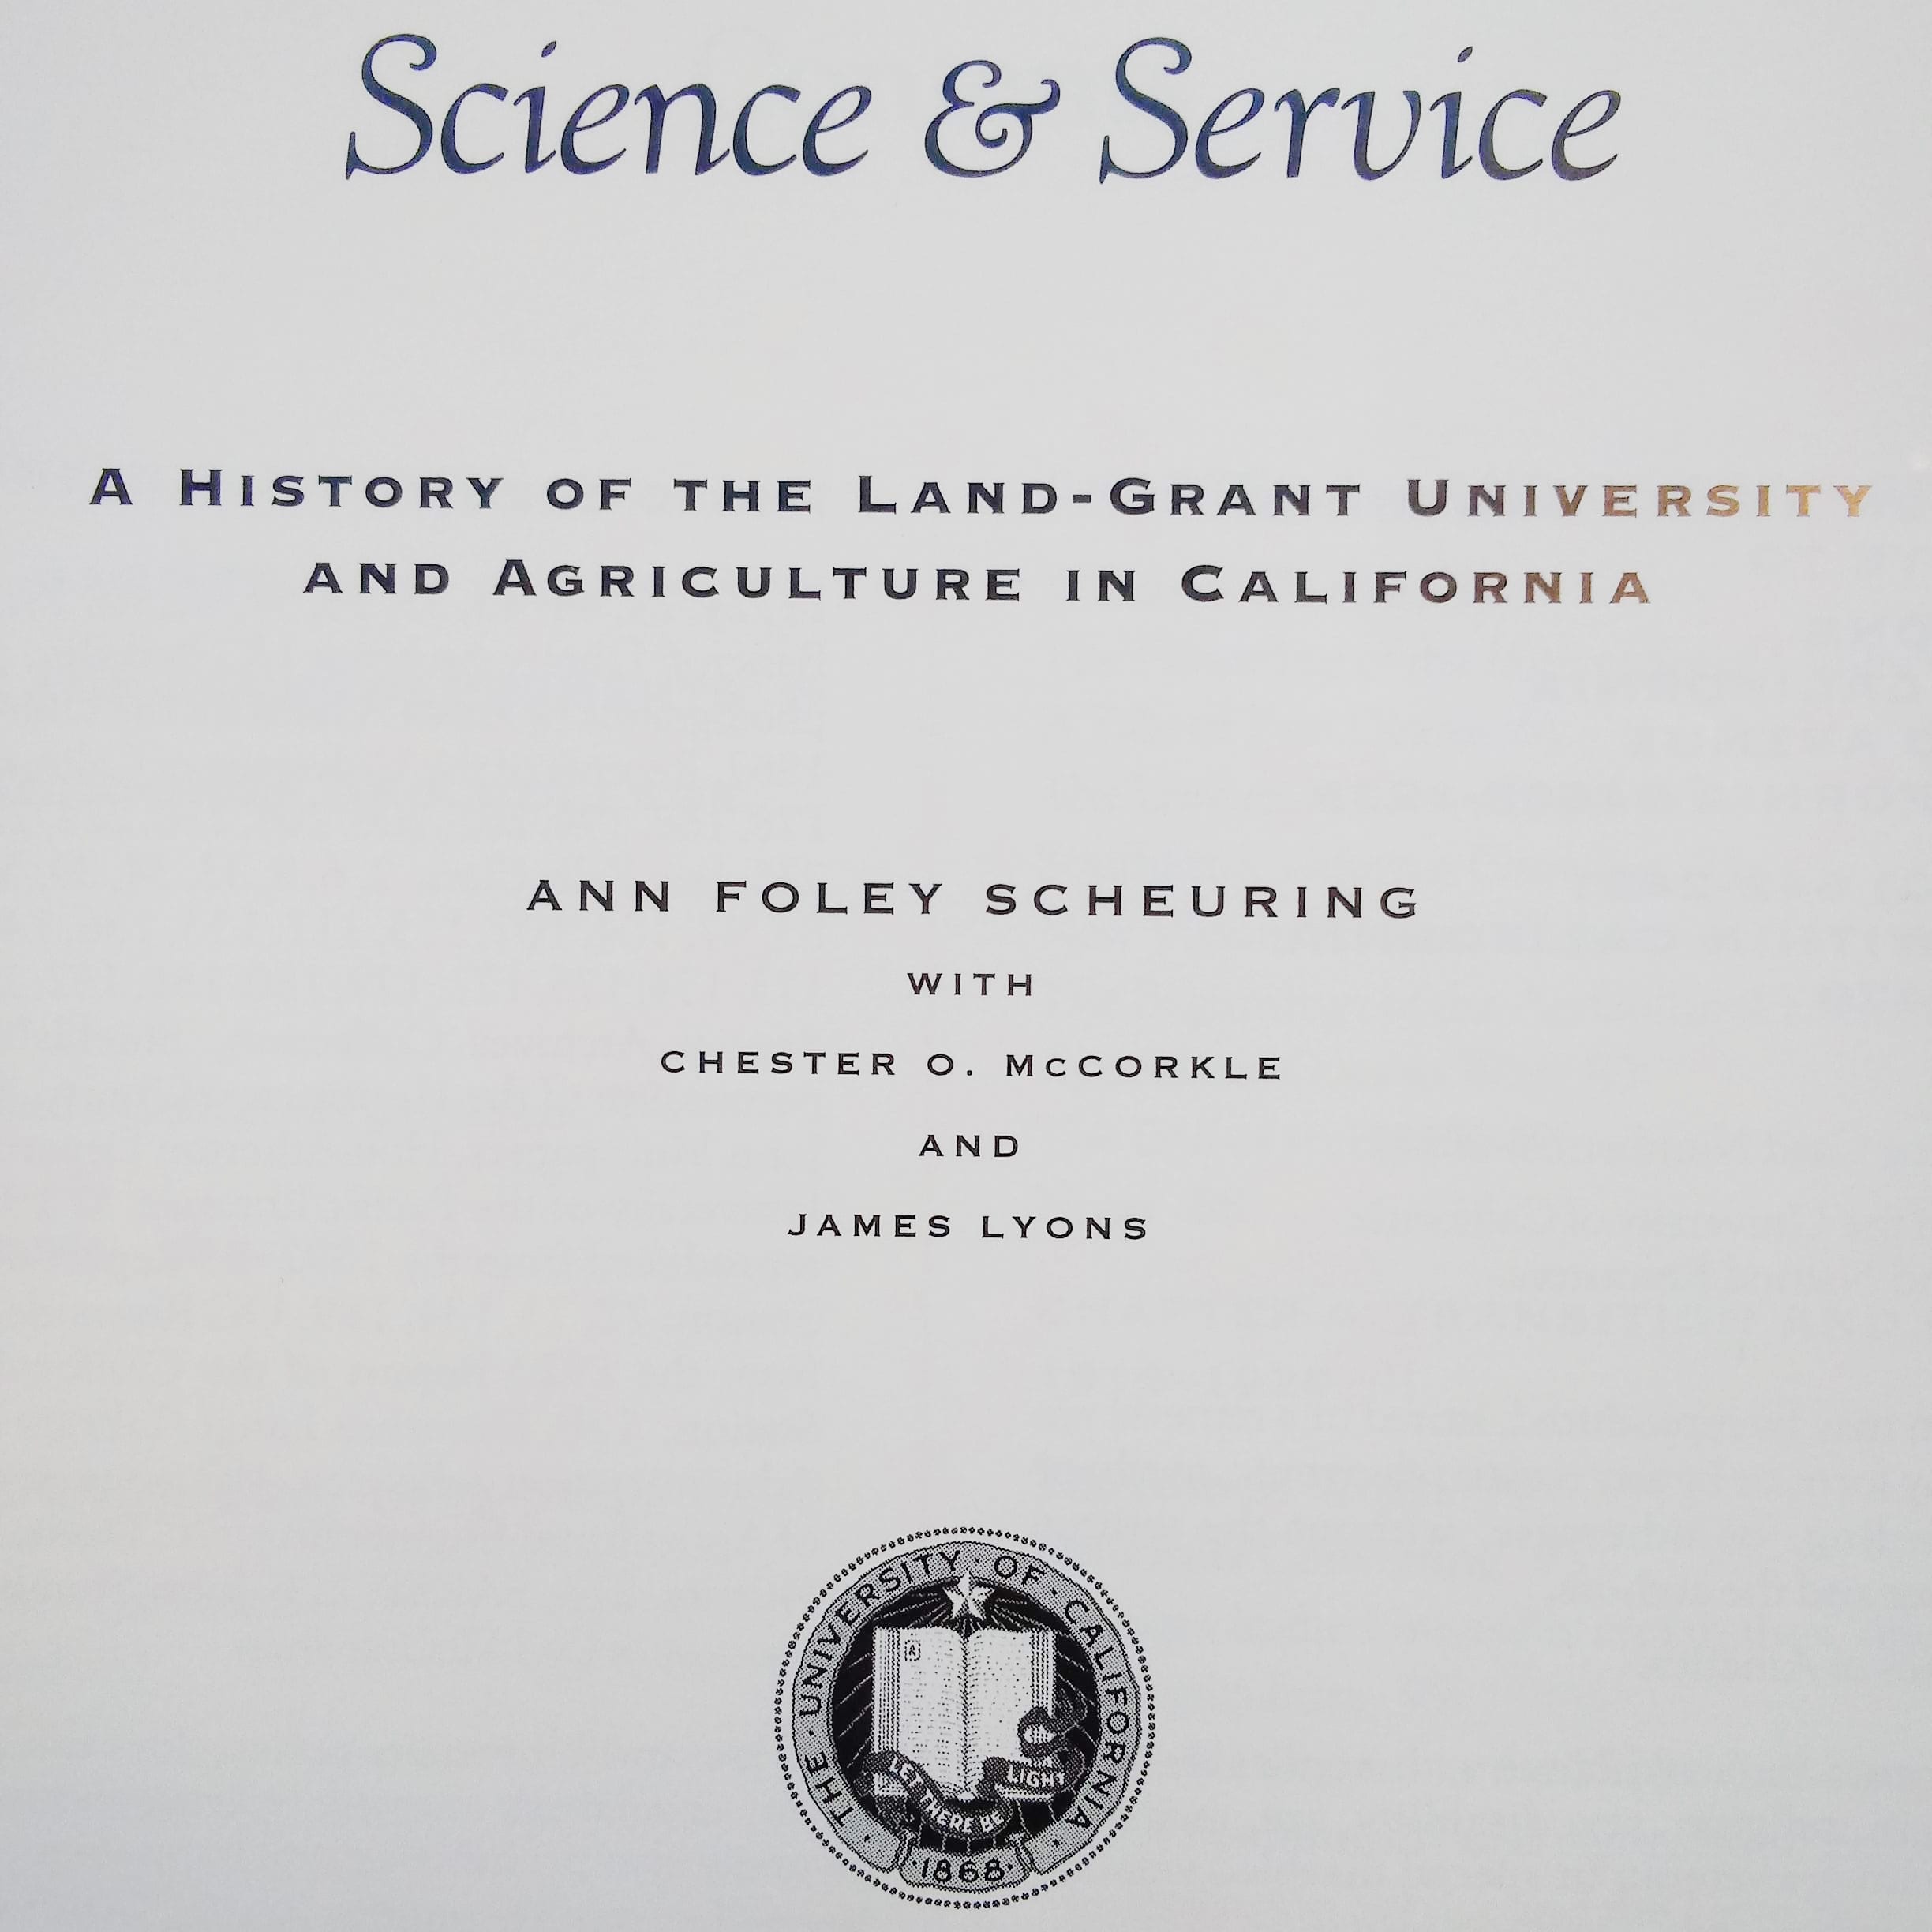 Science and Service by Ann Foley Scheuring, 1995